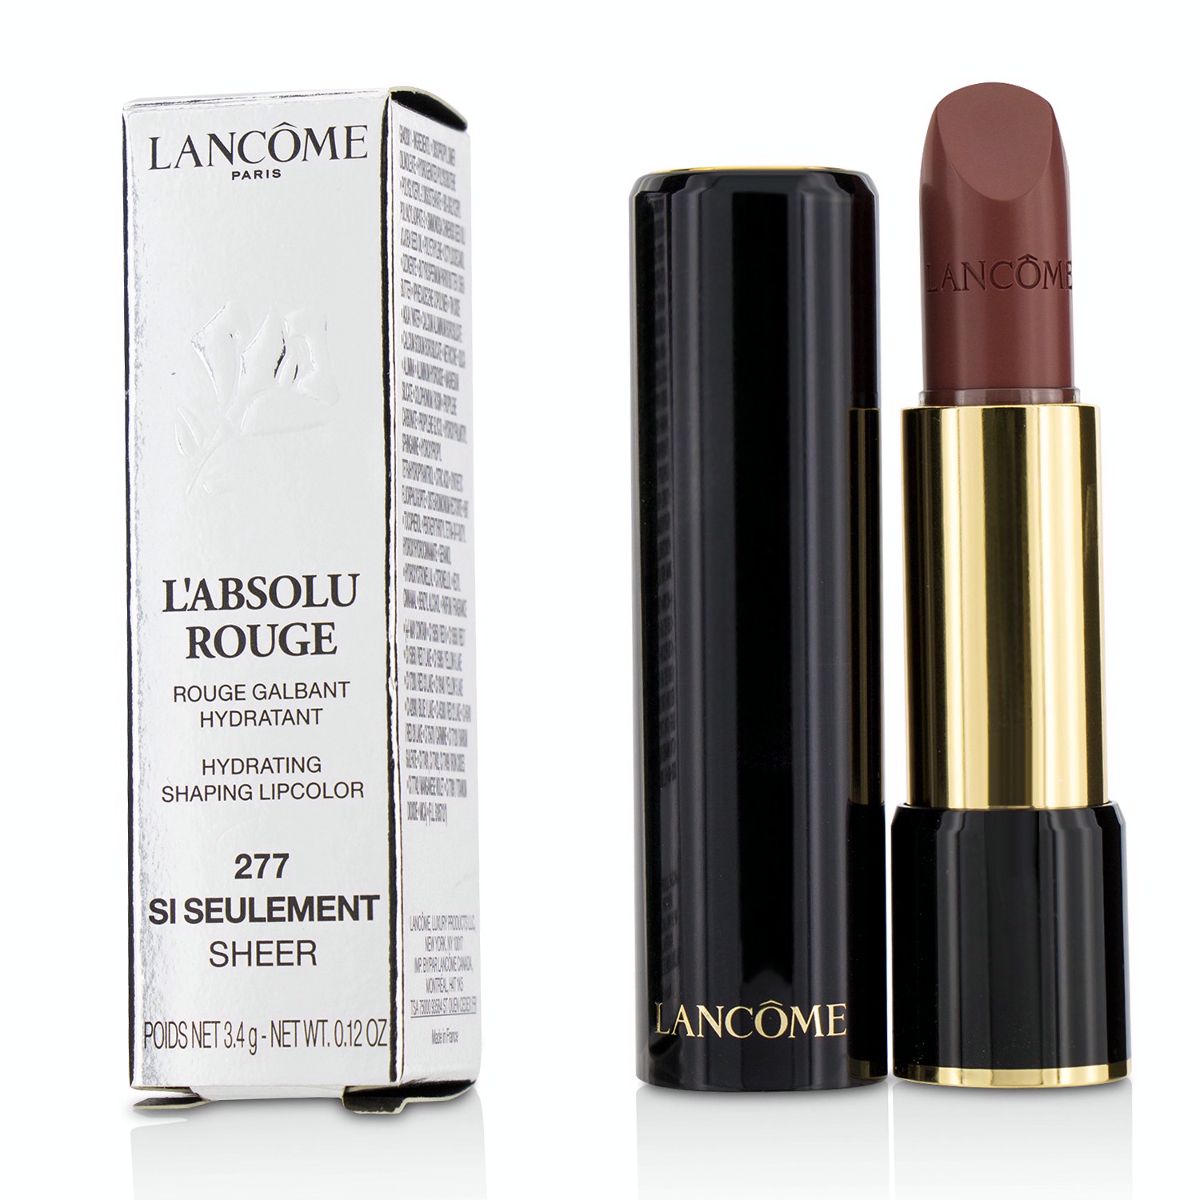 L Absolu Rouge Hydrating Shaping Lipcolor - # 277 Si Seulement (Sheer) Lancome Image